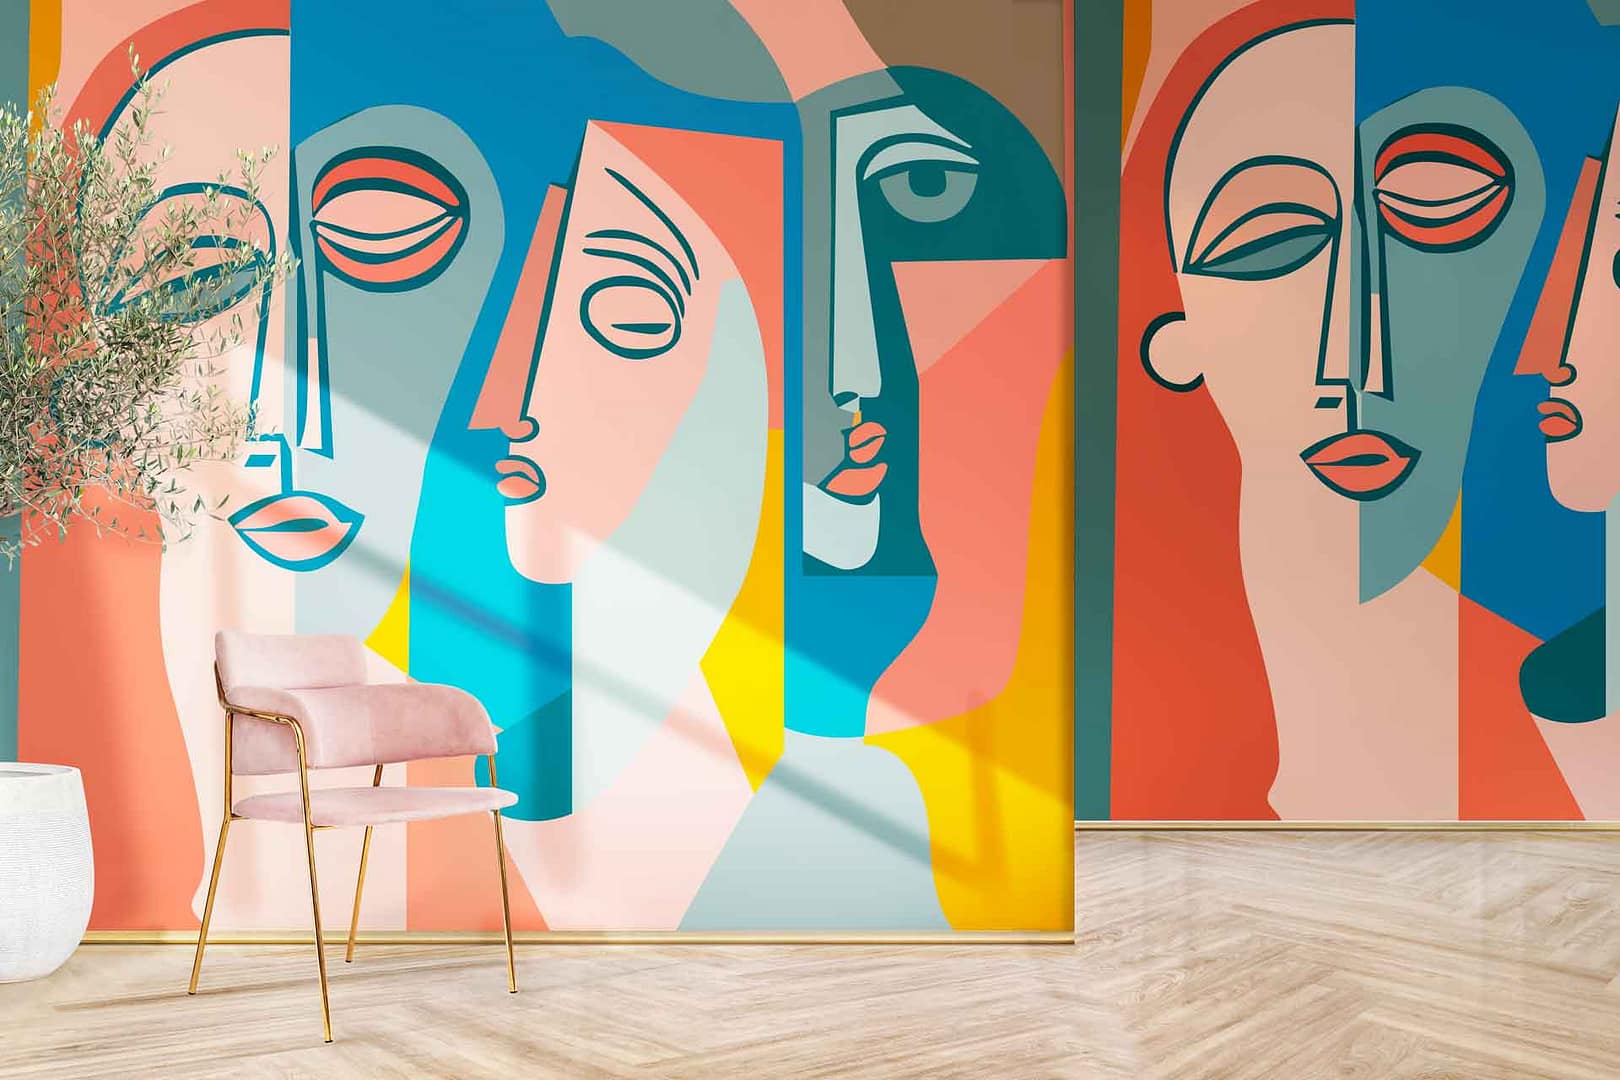 Face It - a wallpaper made up of Picasso faces in an artistic style by Cara Saven Wall Design